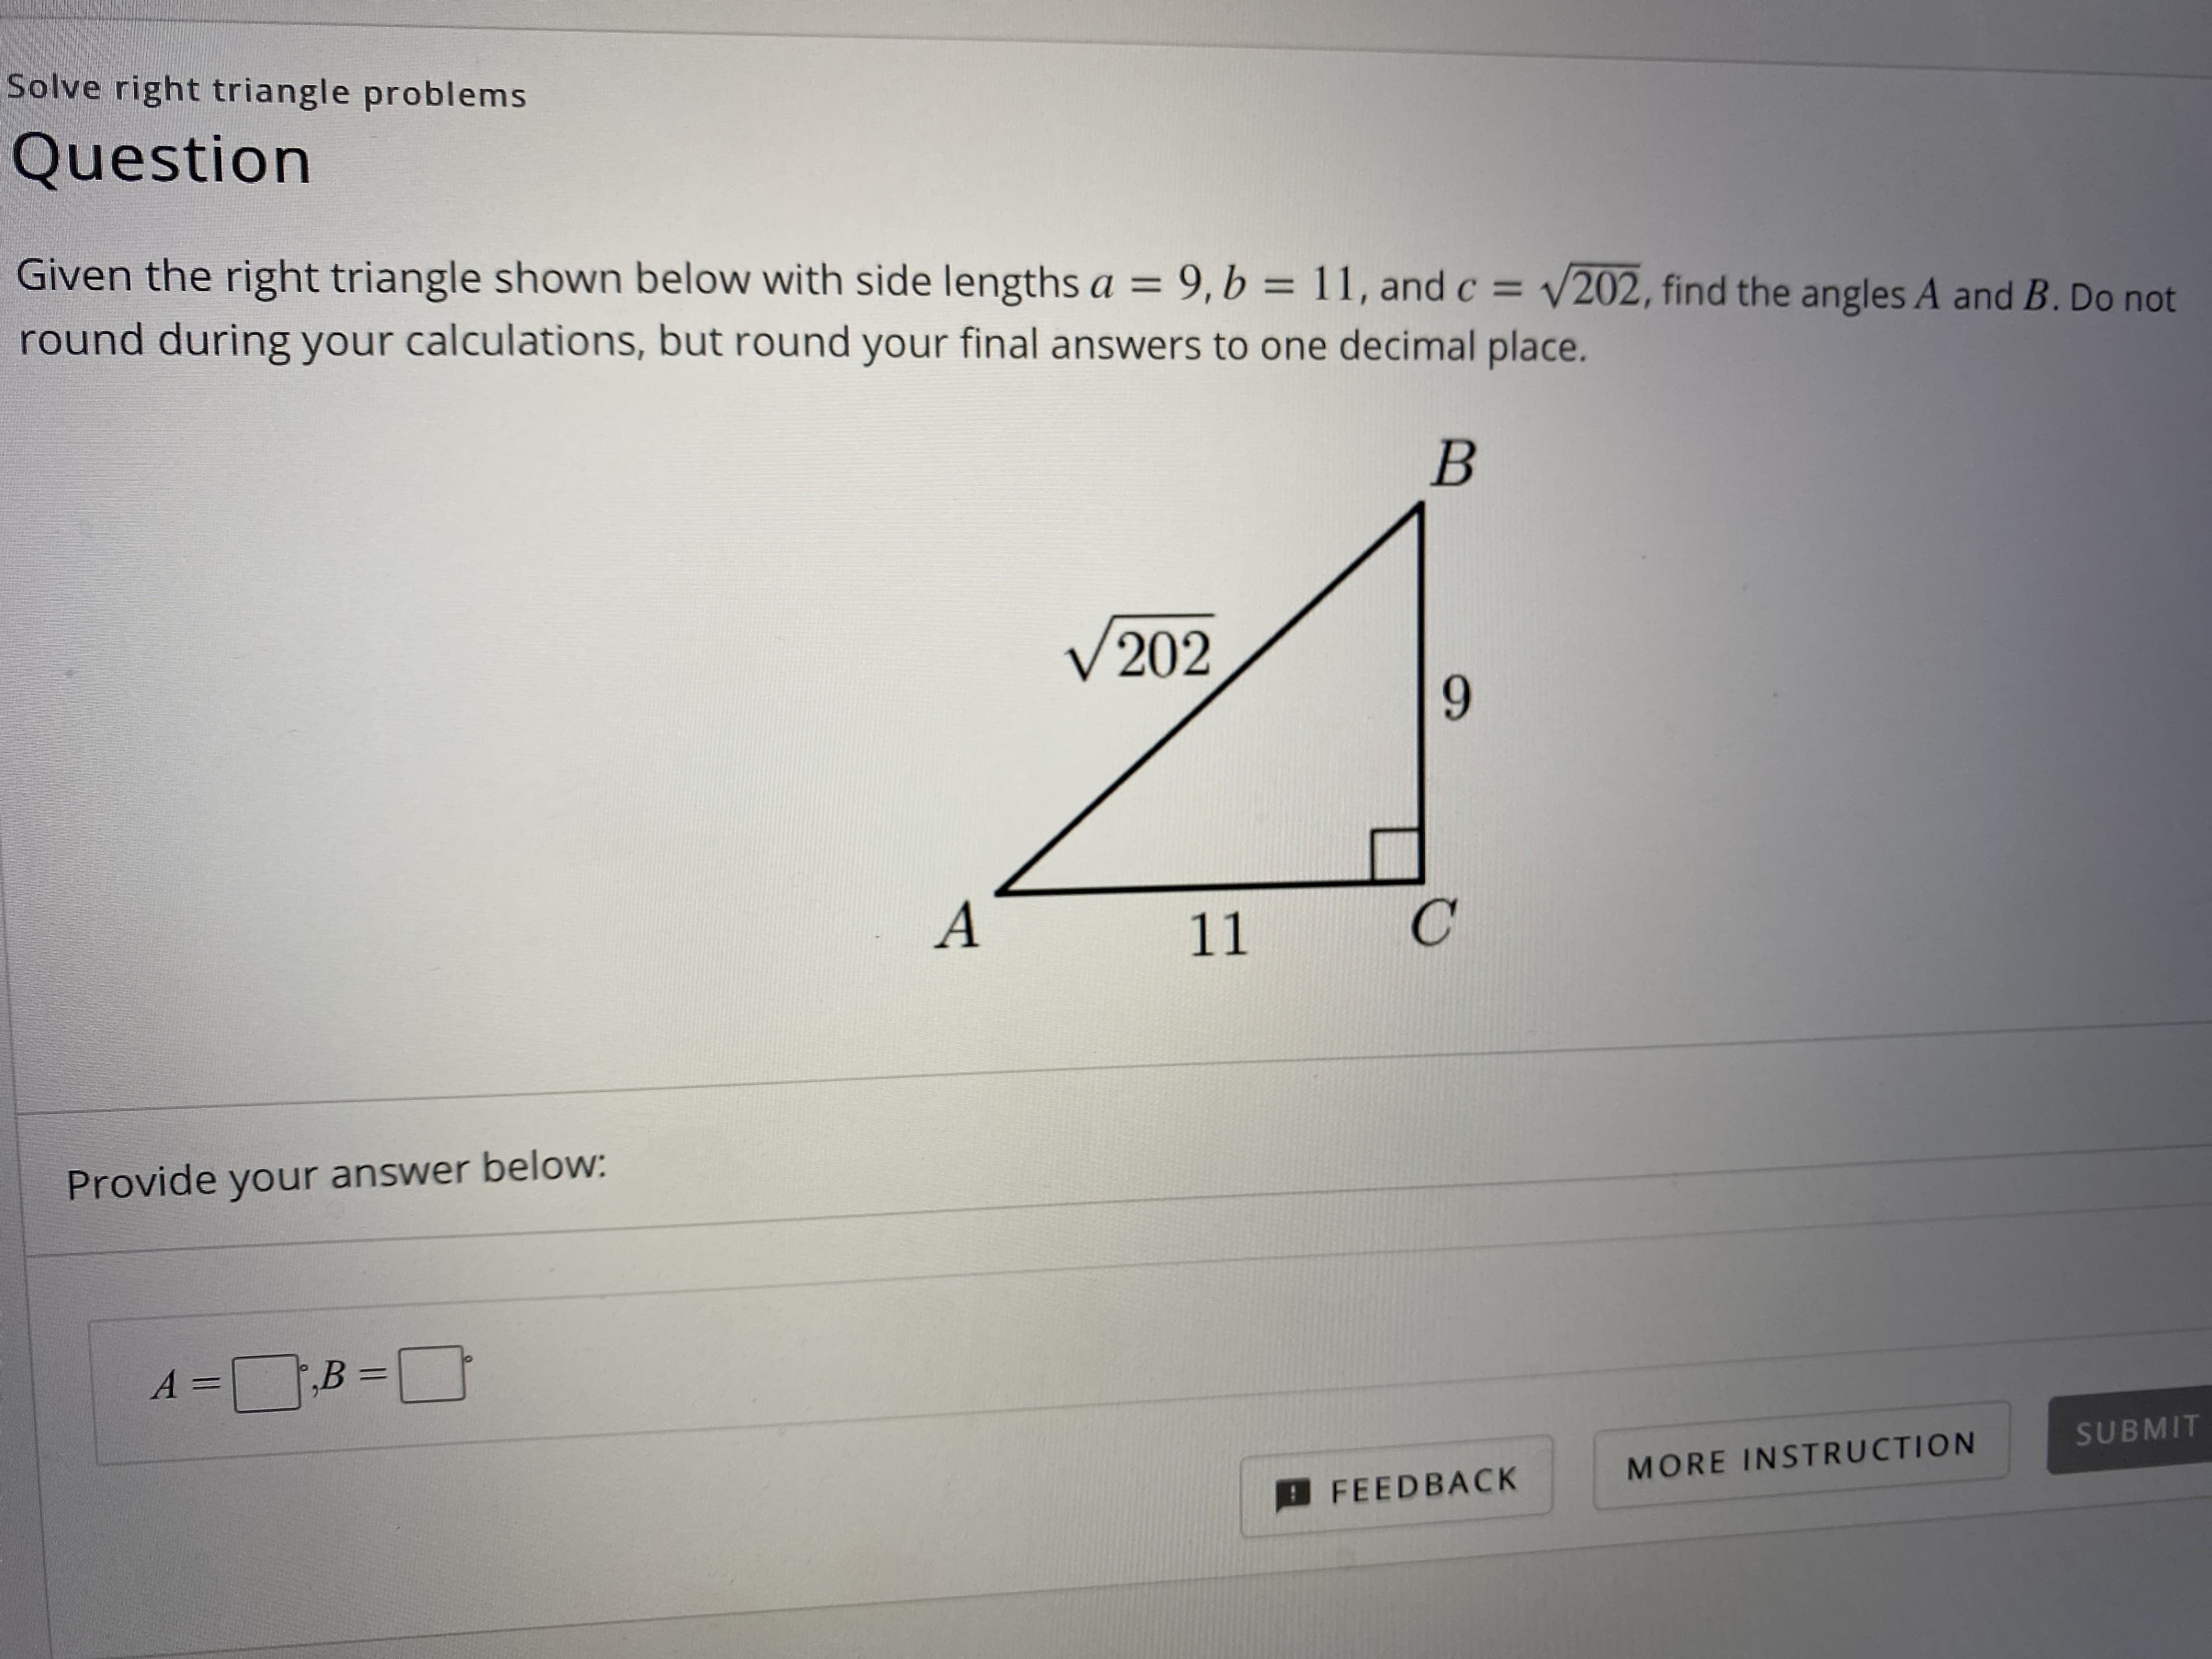 Given the right triangle shown below with side lengths a = 9,b = 11, and c = V202, find the angles A and B. Do not
round during your calculations, but round your final answers to one decimal place.
%3D
